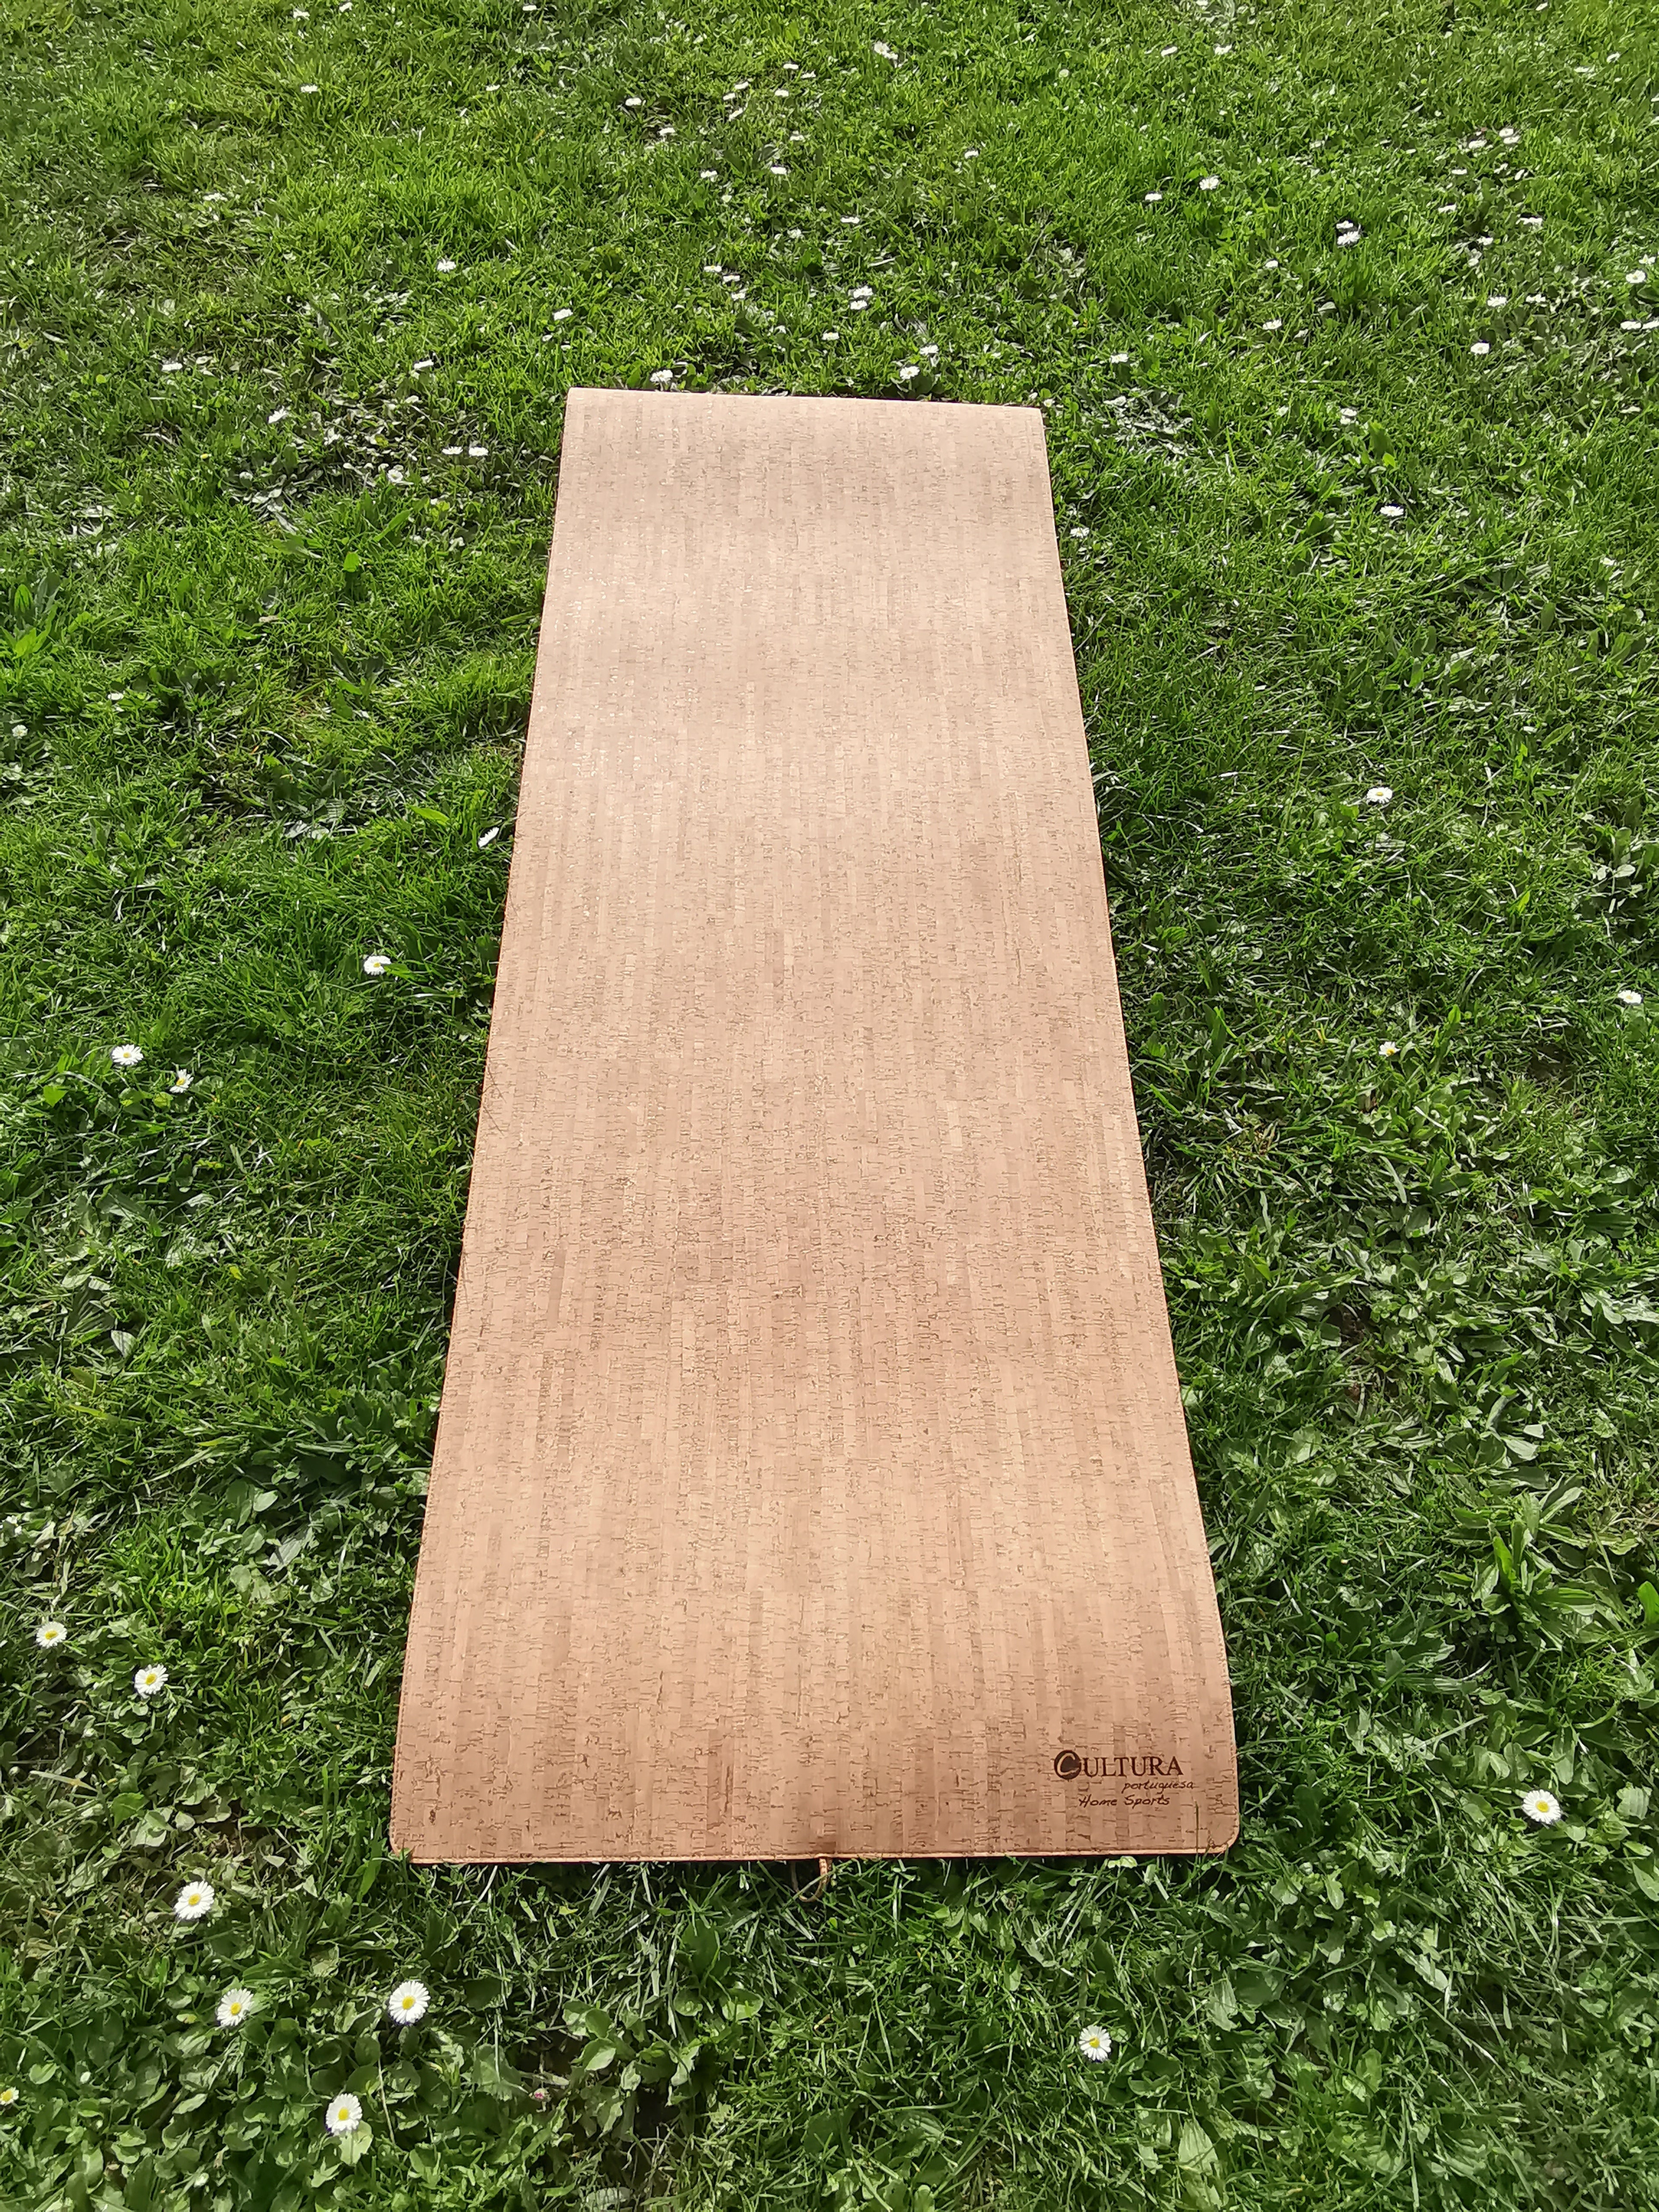 Cork Yoga Mat Natural - Home Sports - Made in Portugal